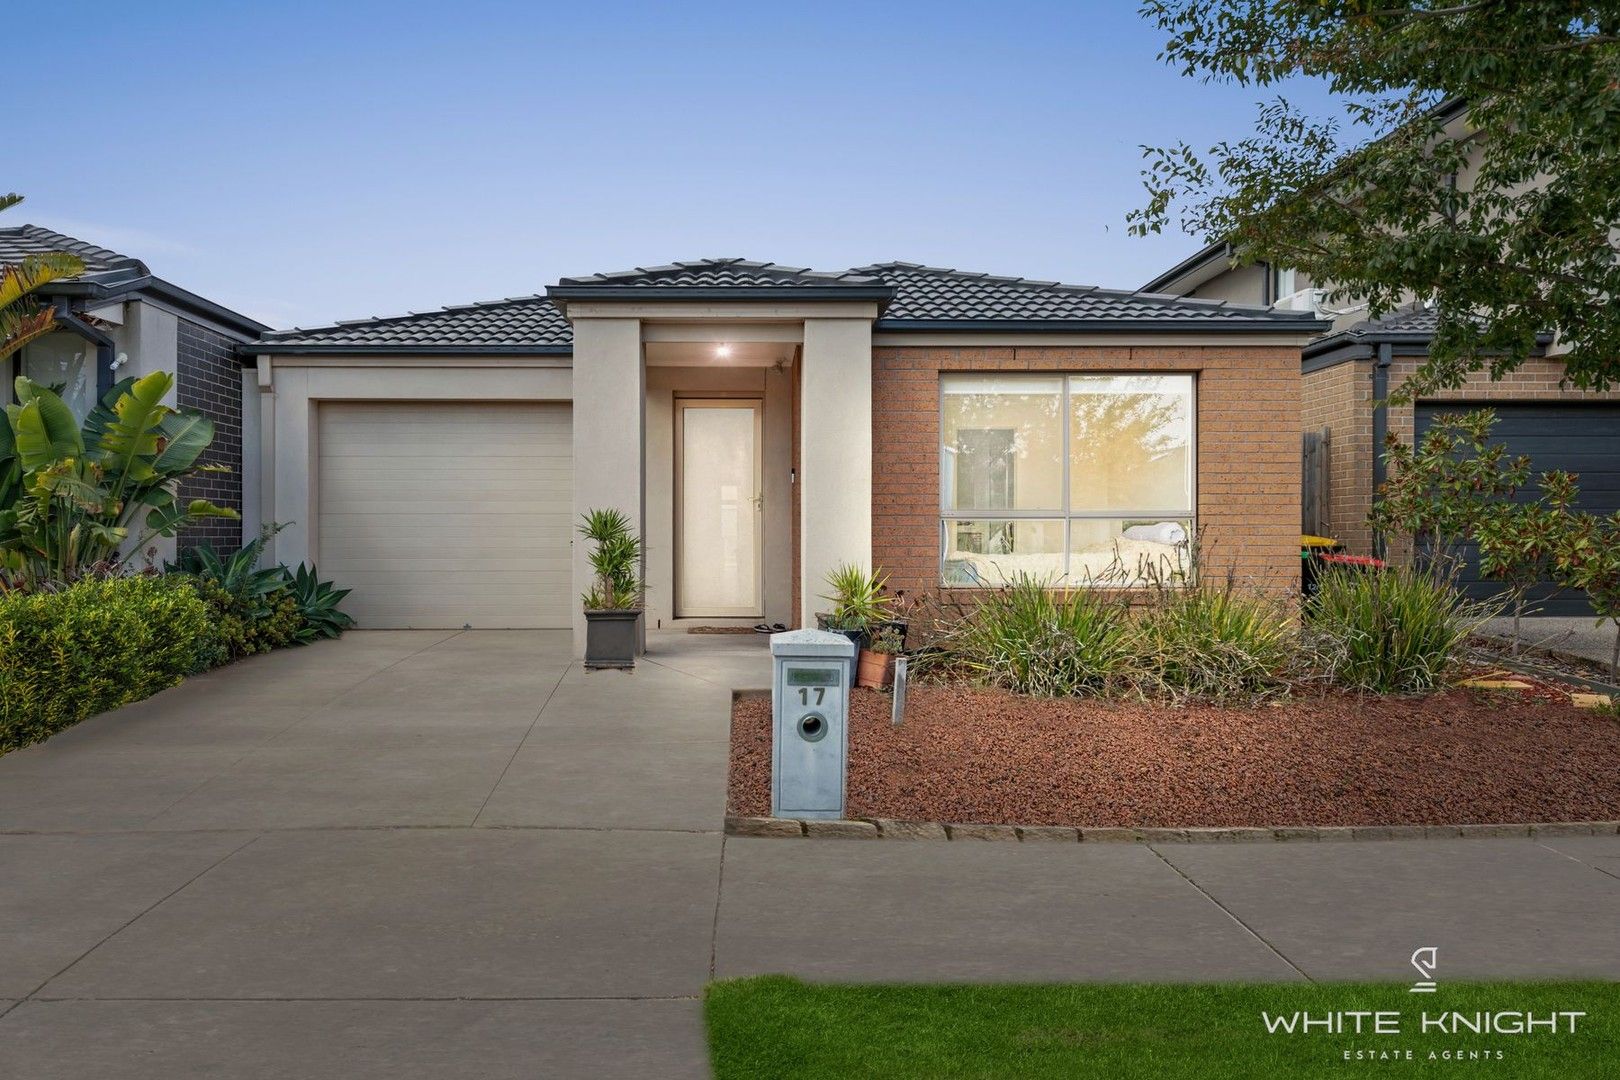 3 bedrooms House in 17 Forrester Grove FRASER RISE VIC, 3336